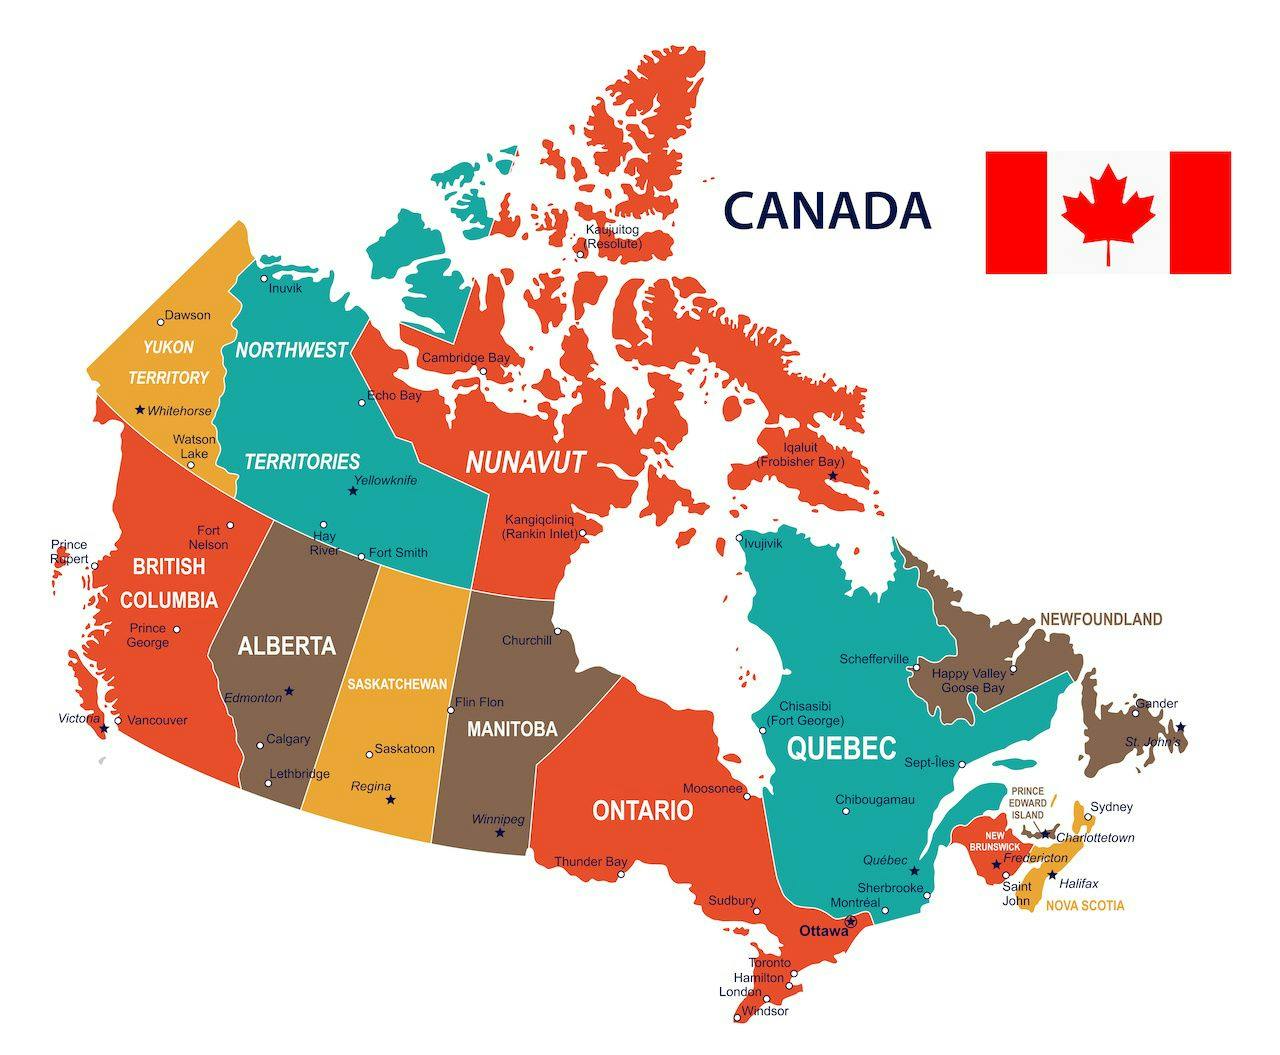 Canadian territories and provinces | Photo credit: Porcupen - adobe.stock.com